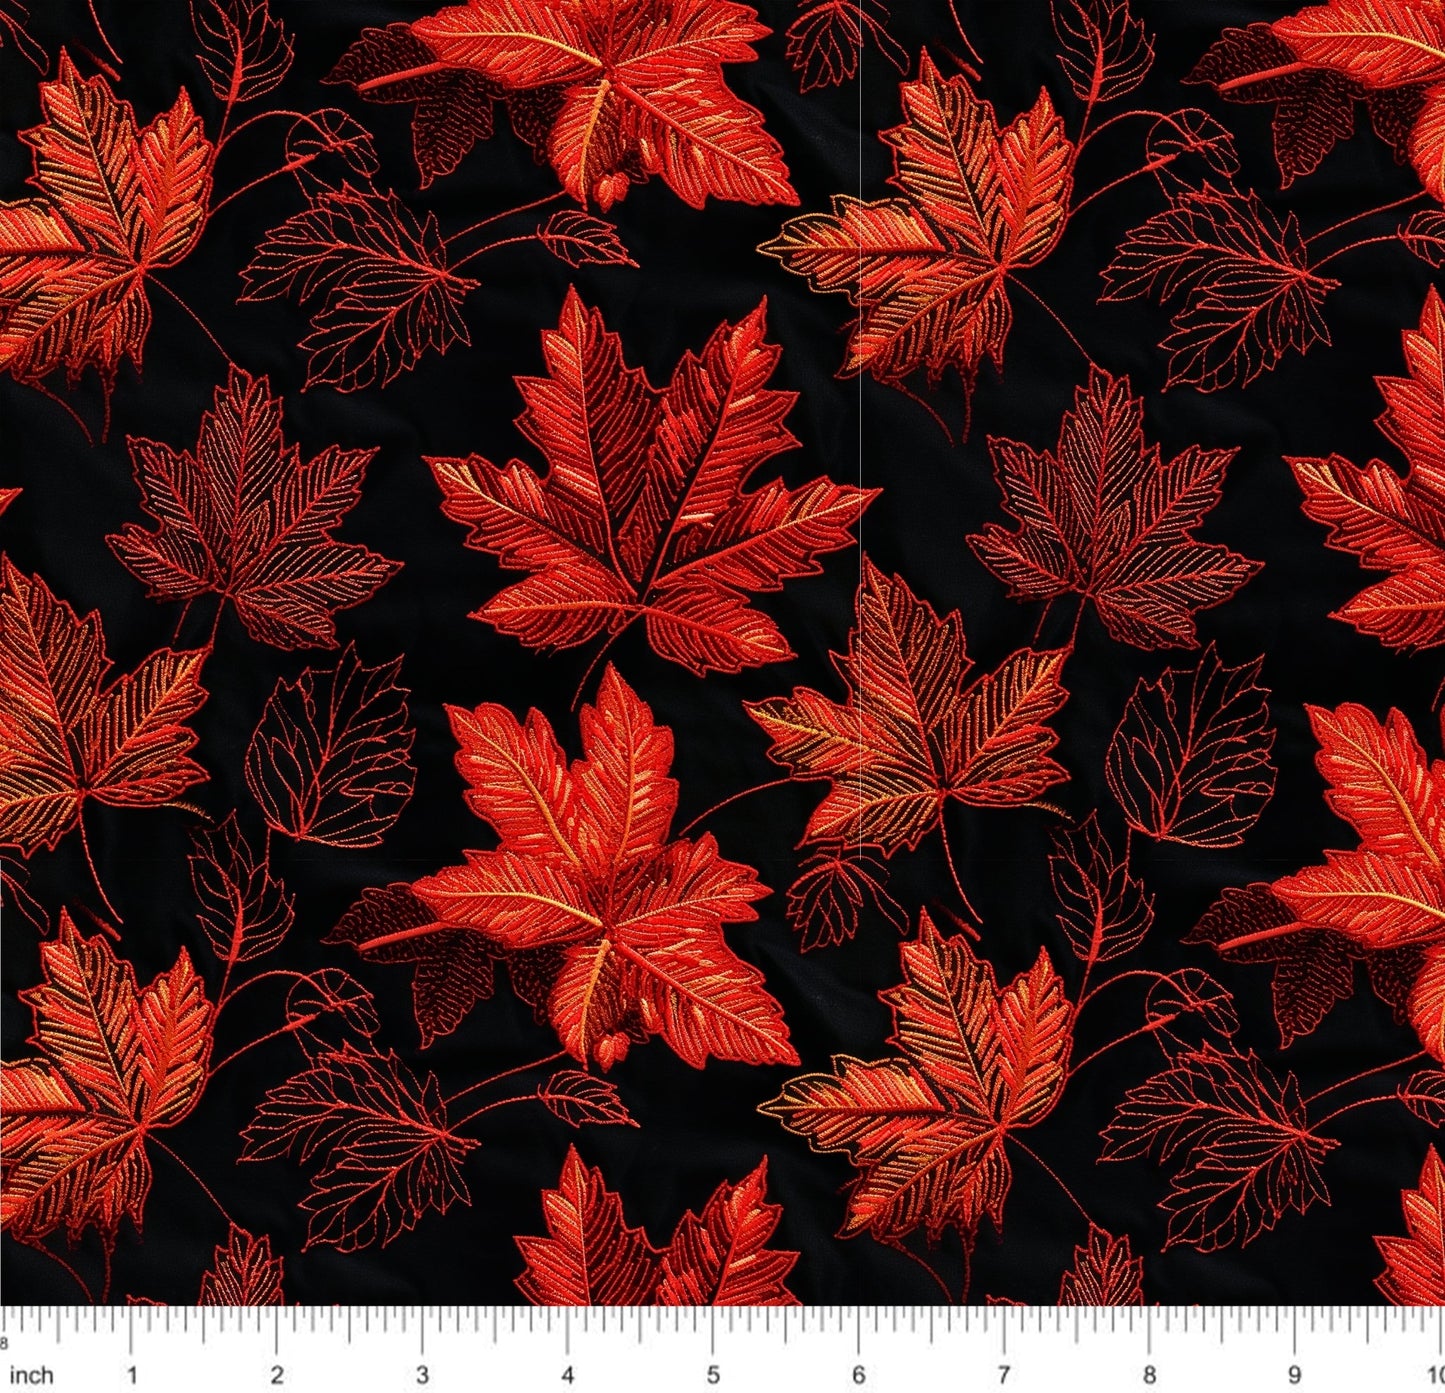 Bonnie's Boujee Designs - Red Maple - Little Rhody Sewing Co.